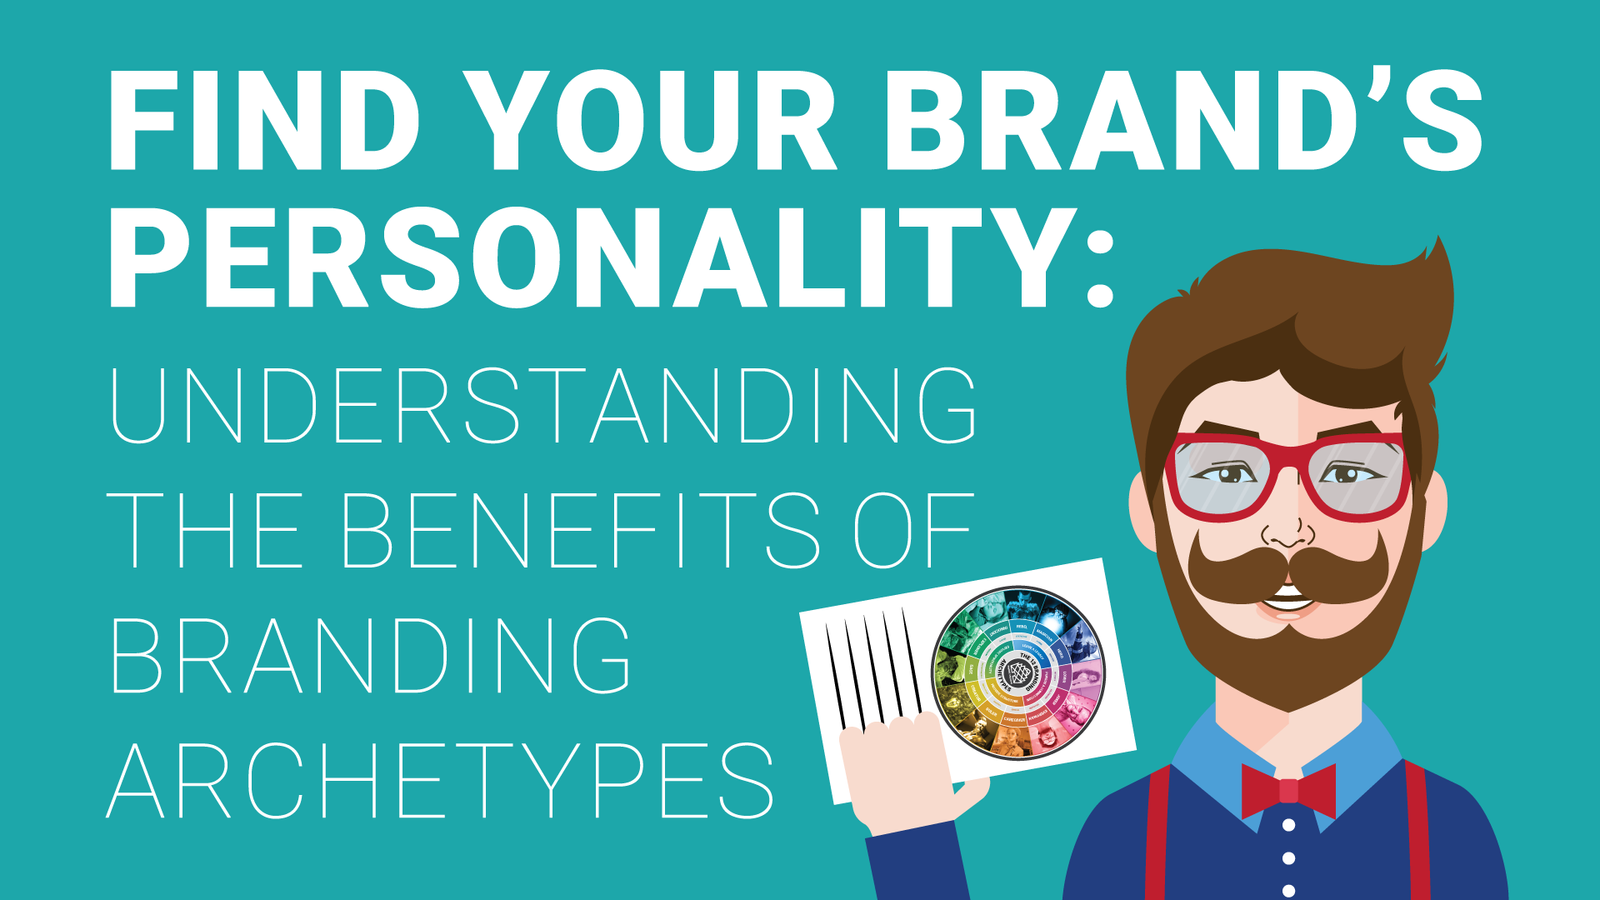 Find Your Brand's Personality: Understanding the Benefits of Branding Archetypes